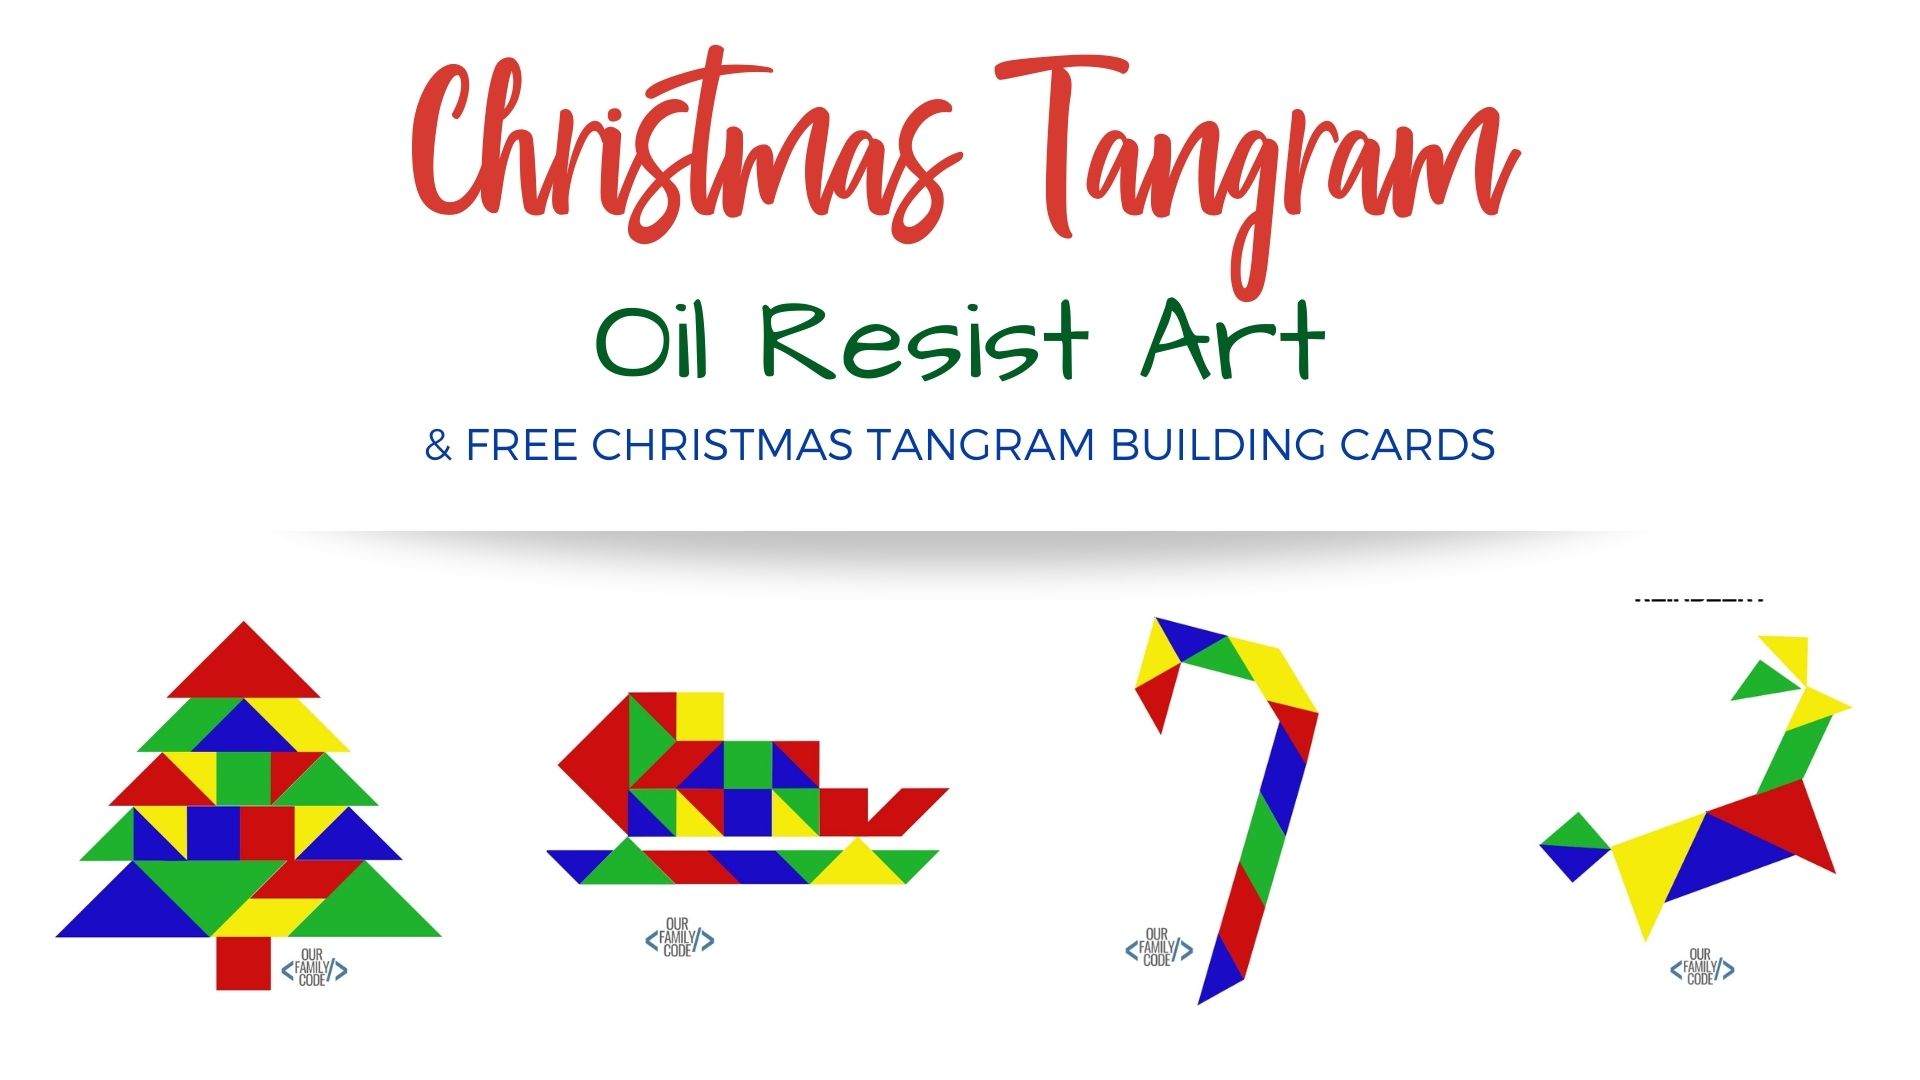 A picture of christmas tangram cards on white background.